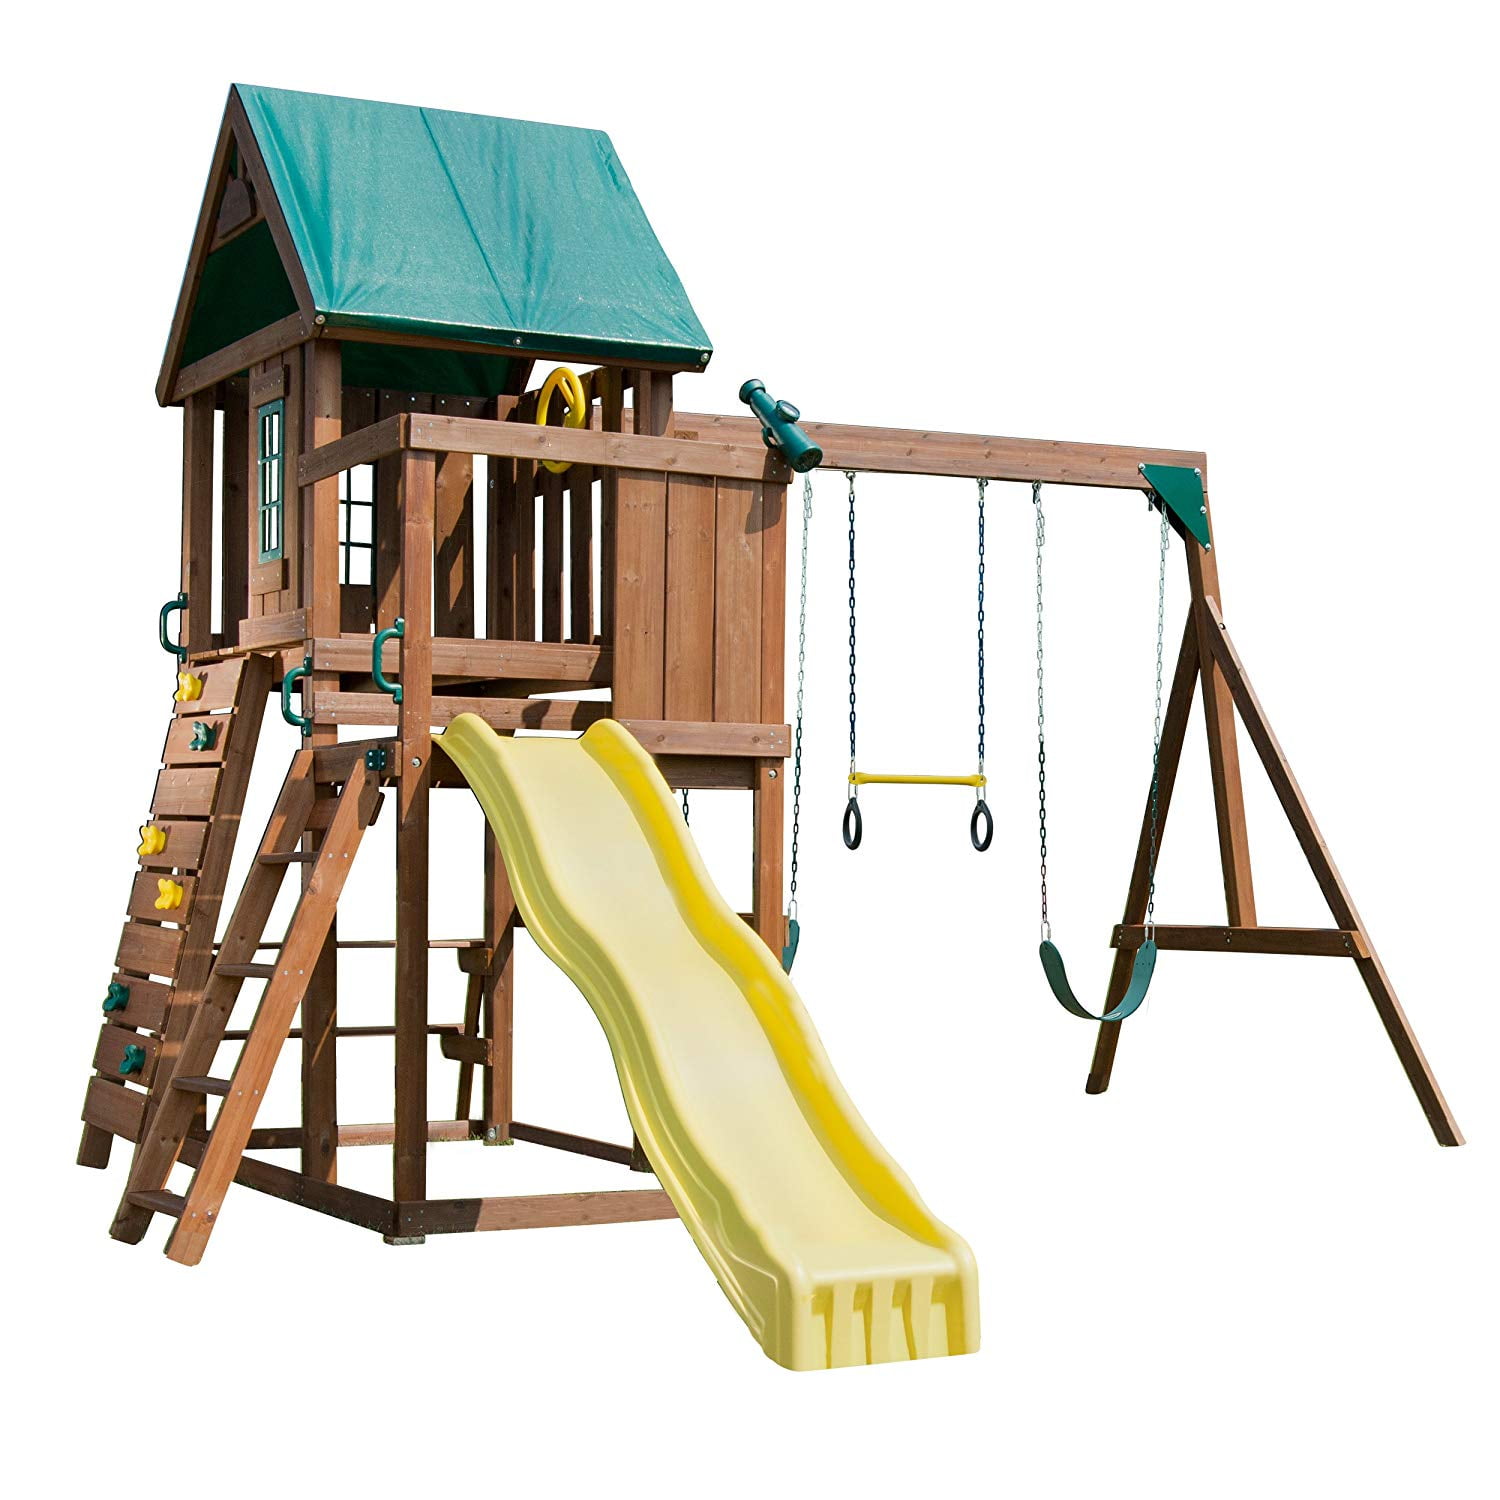 Swing N Slide Altamont Wooden Set, Wooden Playhouse With Slide And Swing